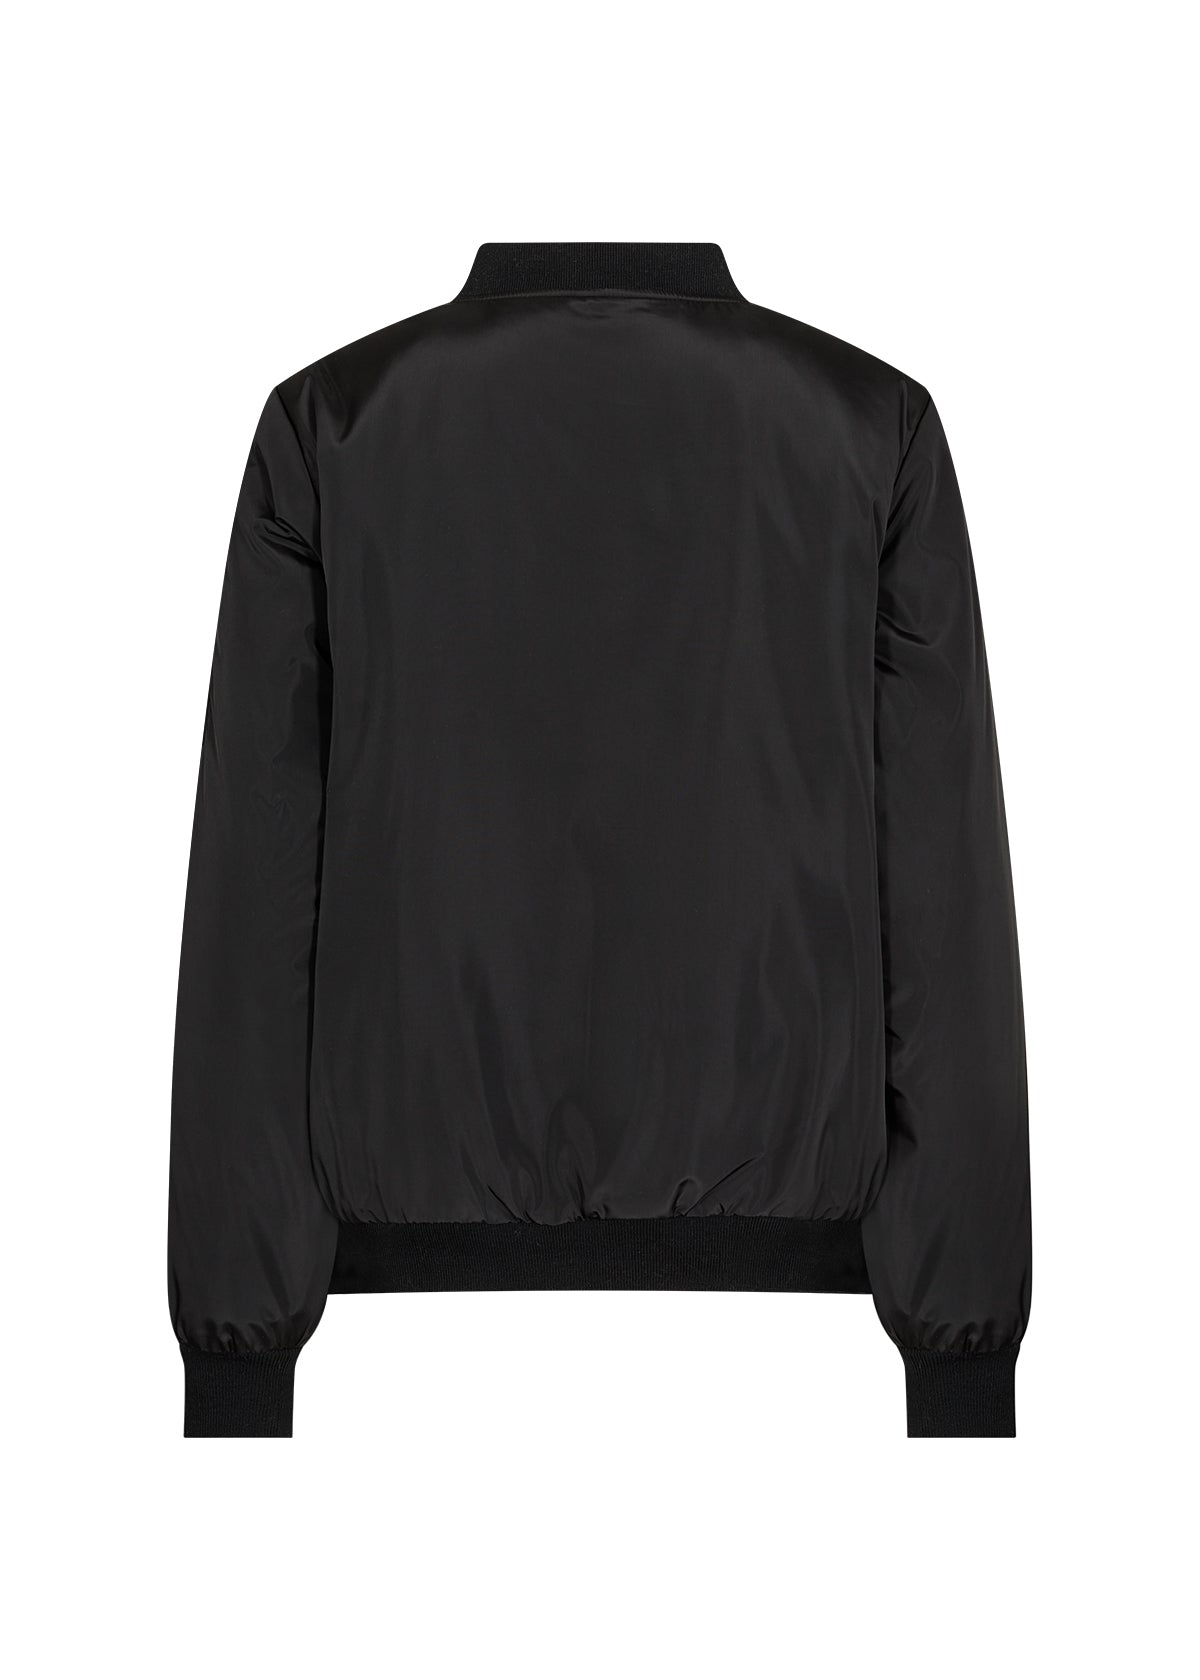 The Soya Concept Tilly Bomber Jacket is a perfect yet simple style for you to have in your wardrobe. With it's high neckline, a zipper, cropped design, a shine finish, and boxy fit you can toss it on as you are heading out the door with confidence.